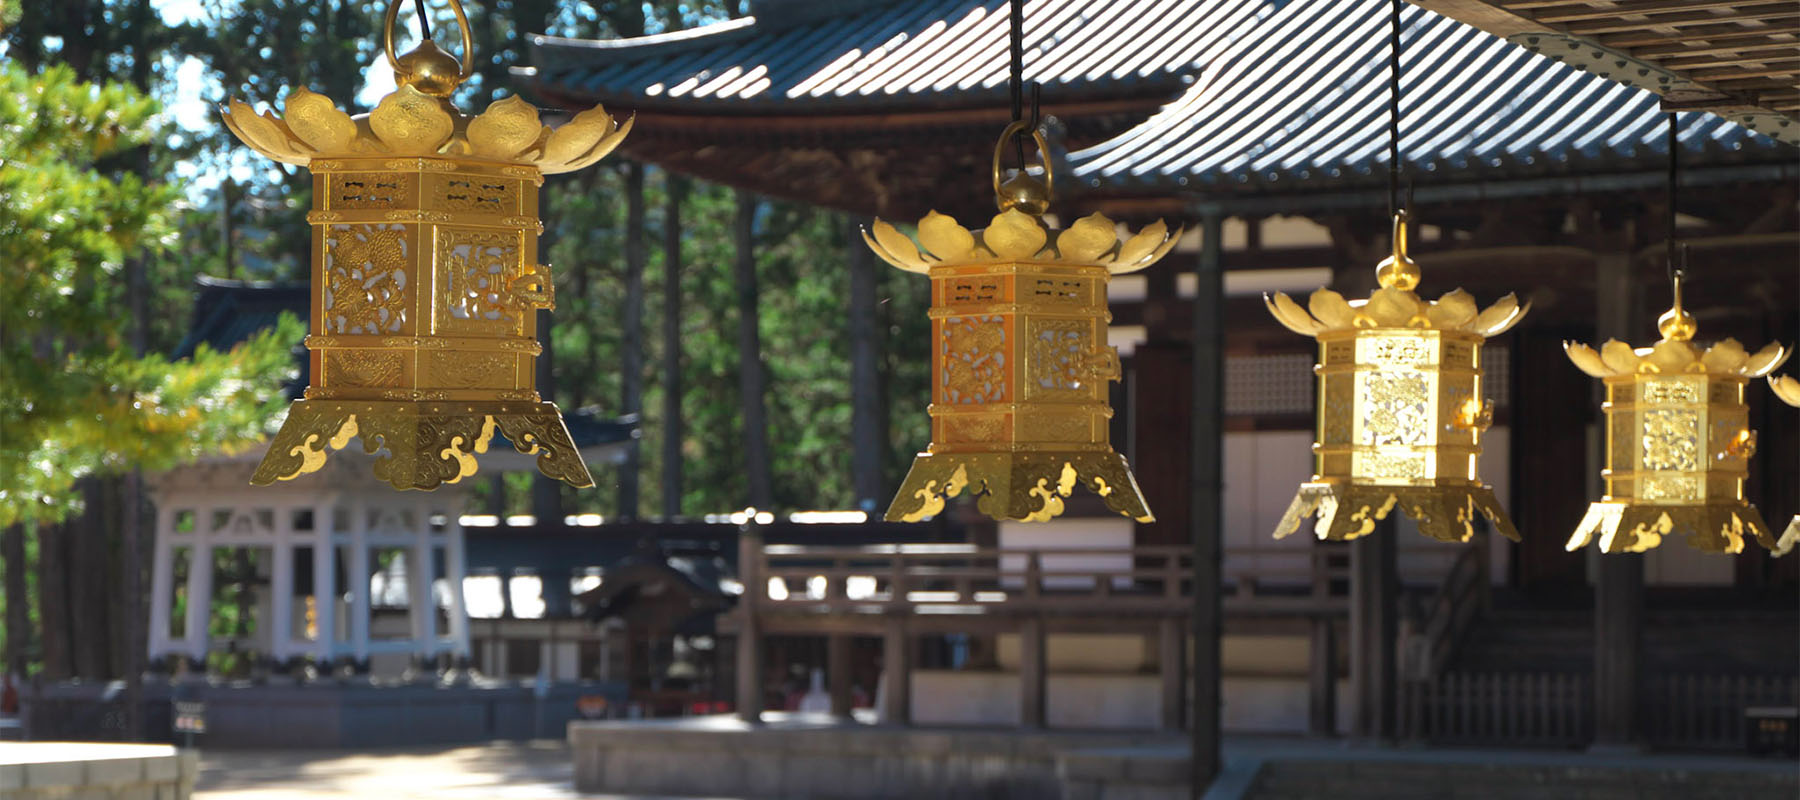 large image of four lanterns at the miedo, a temple at Japan's Mt. Koya